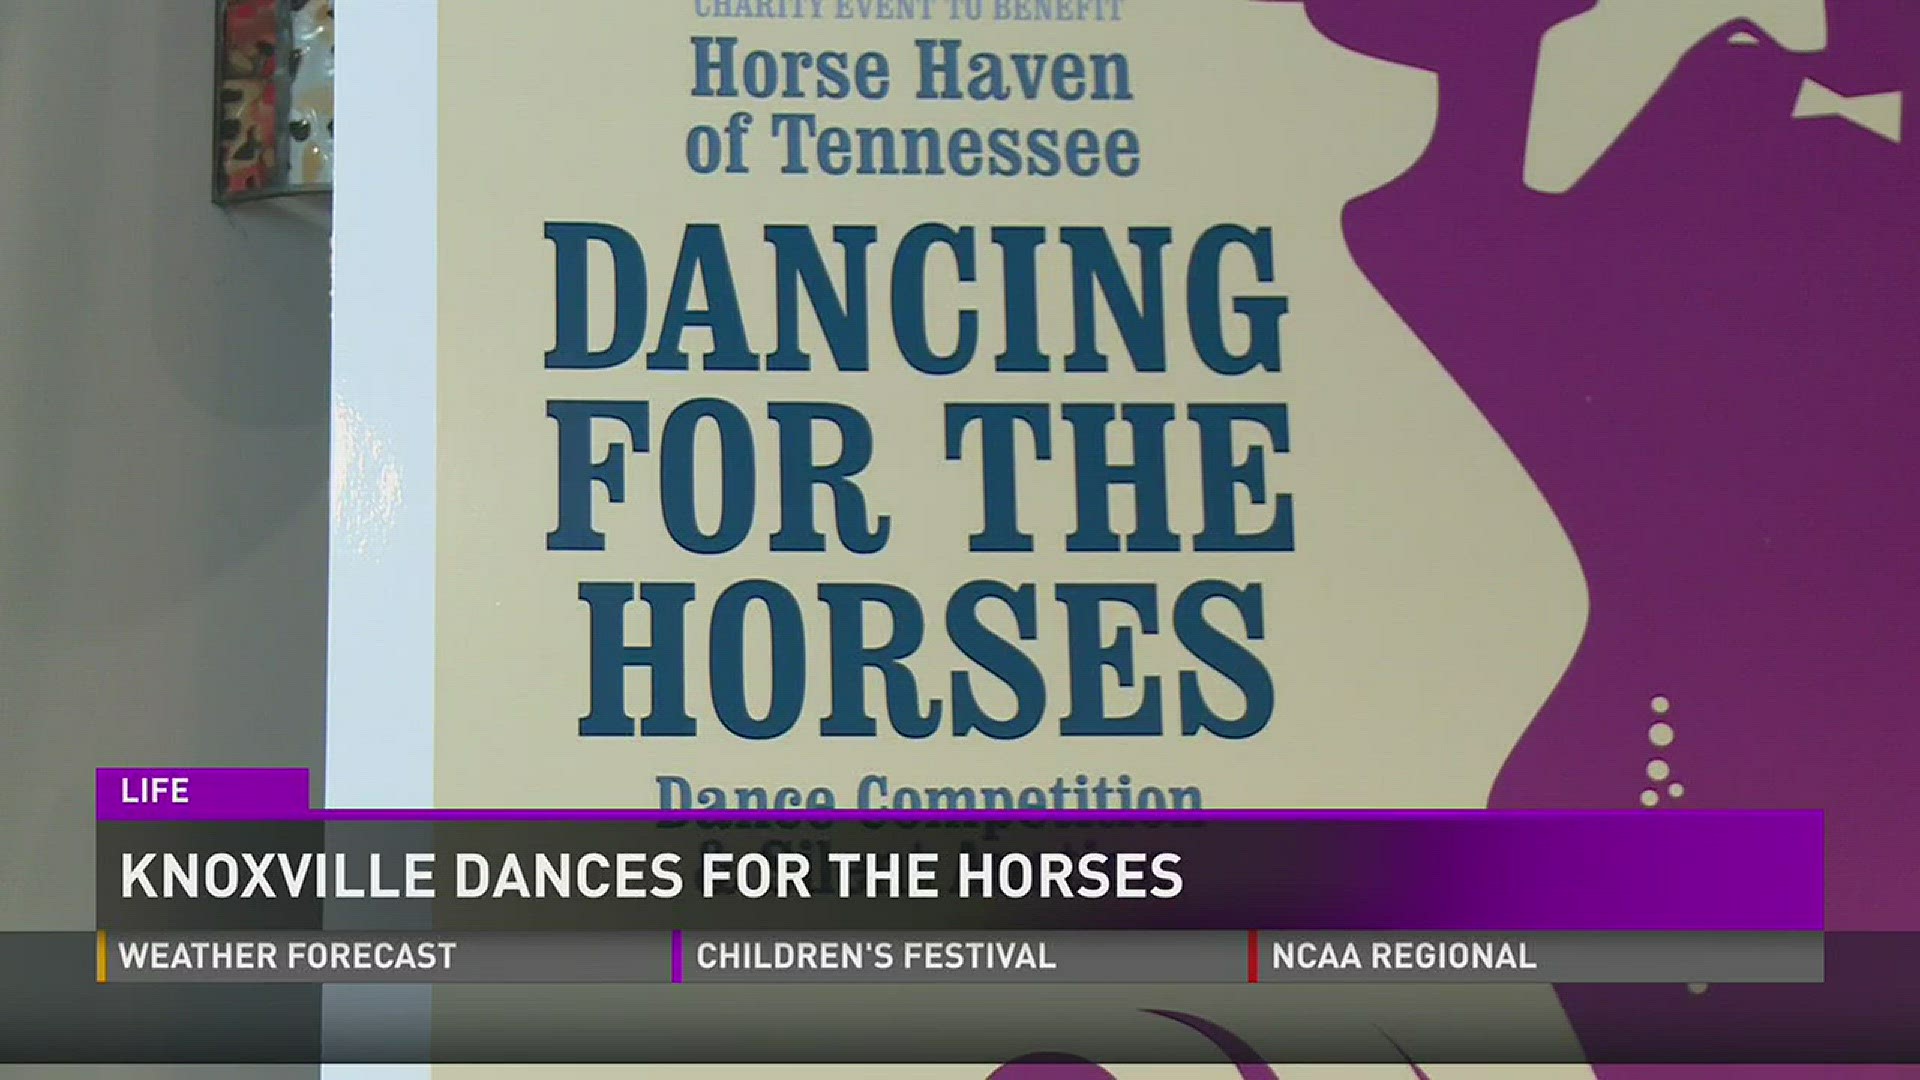 The Horse Haven of Tennessee saddled up for its most important fundraiser of the year.